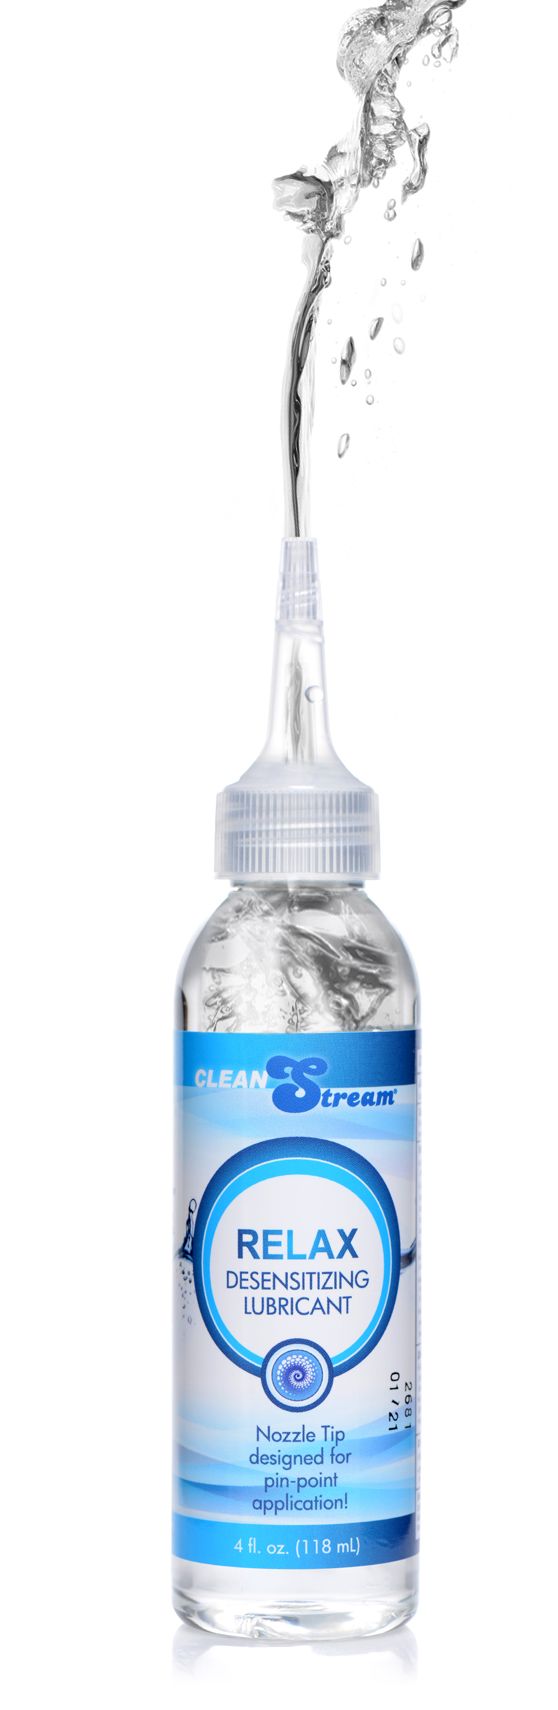 Relax Desensitizing Lubricant With Nozzle Tip - 8 oz.